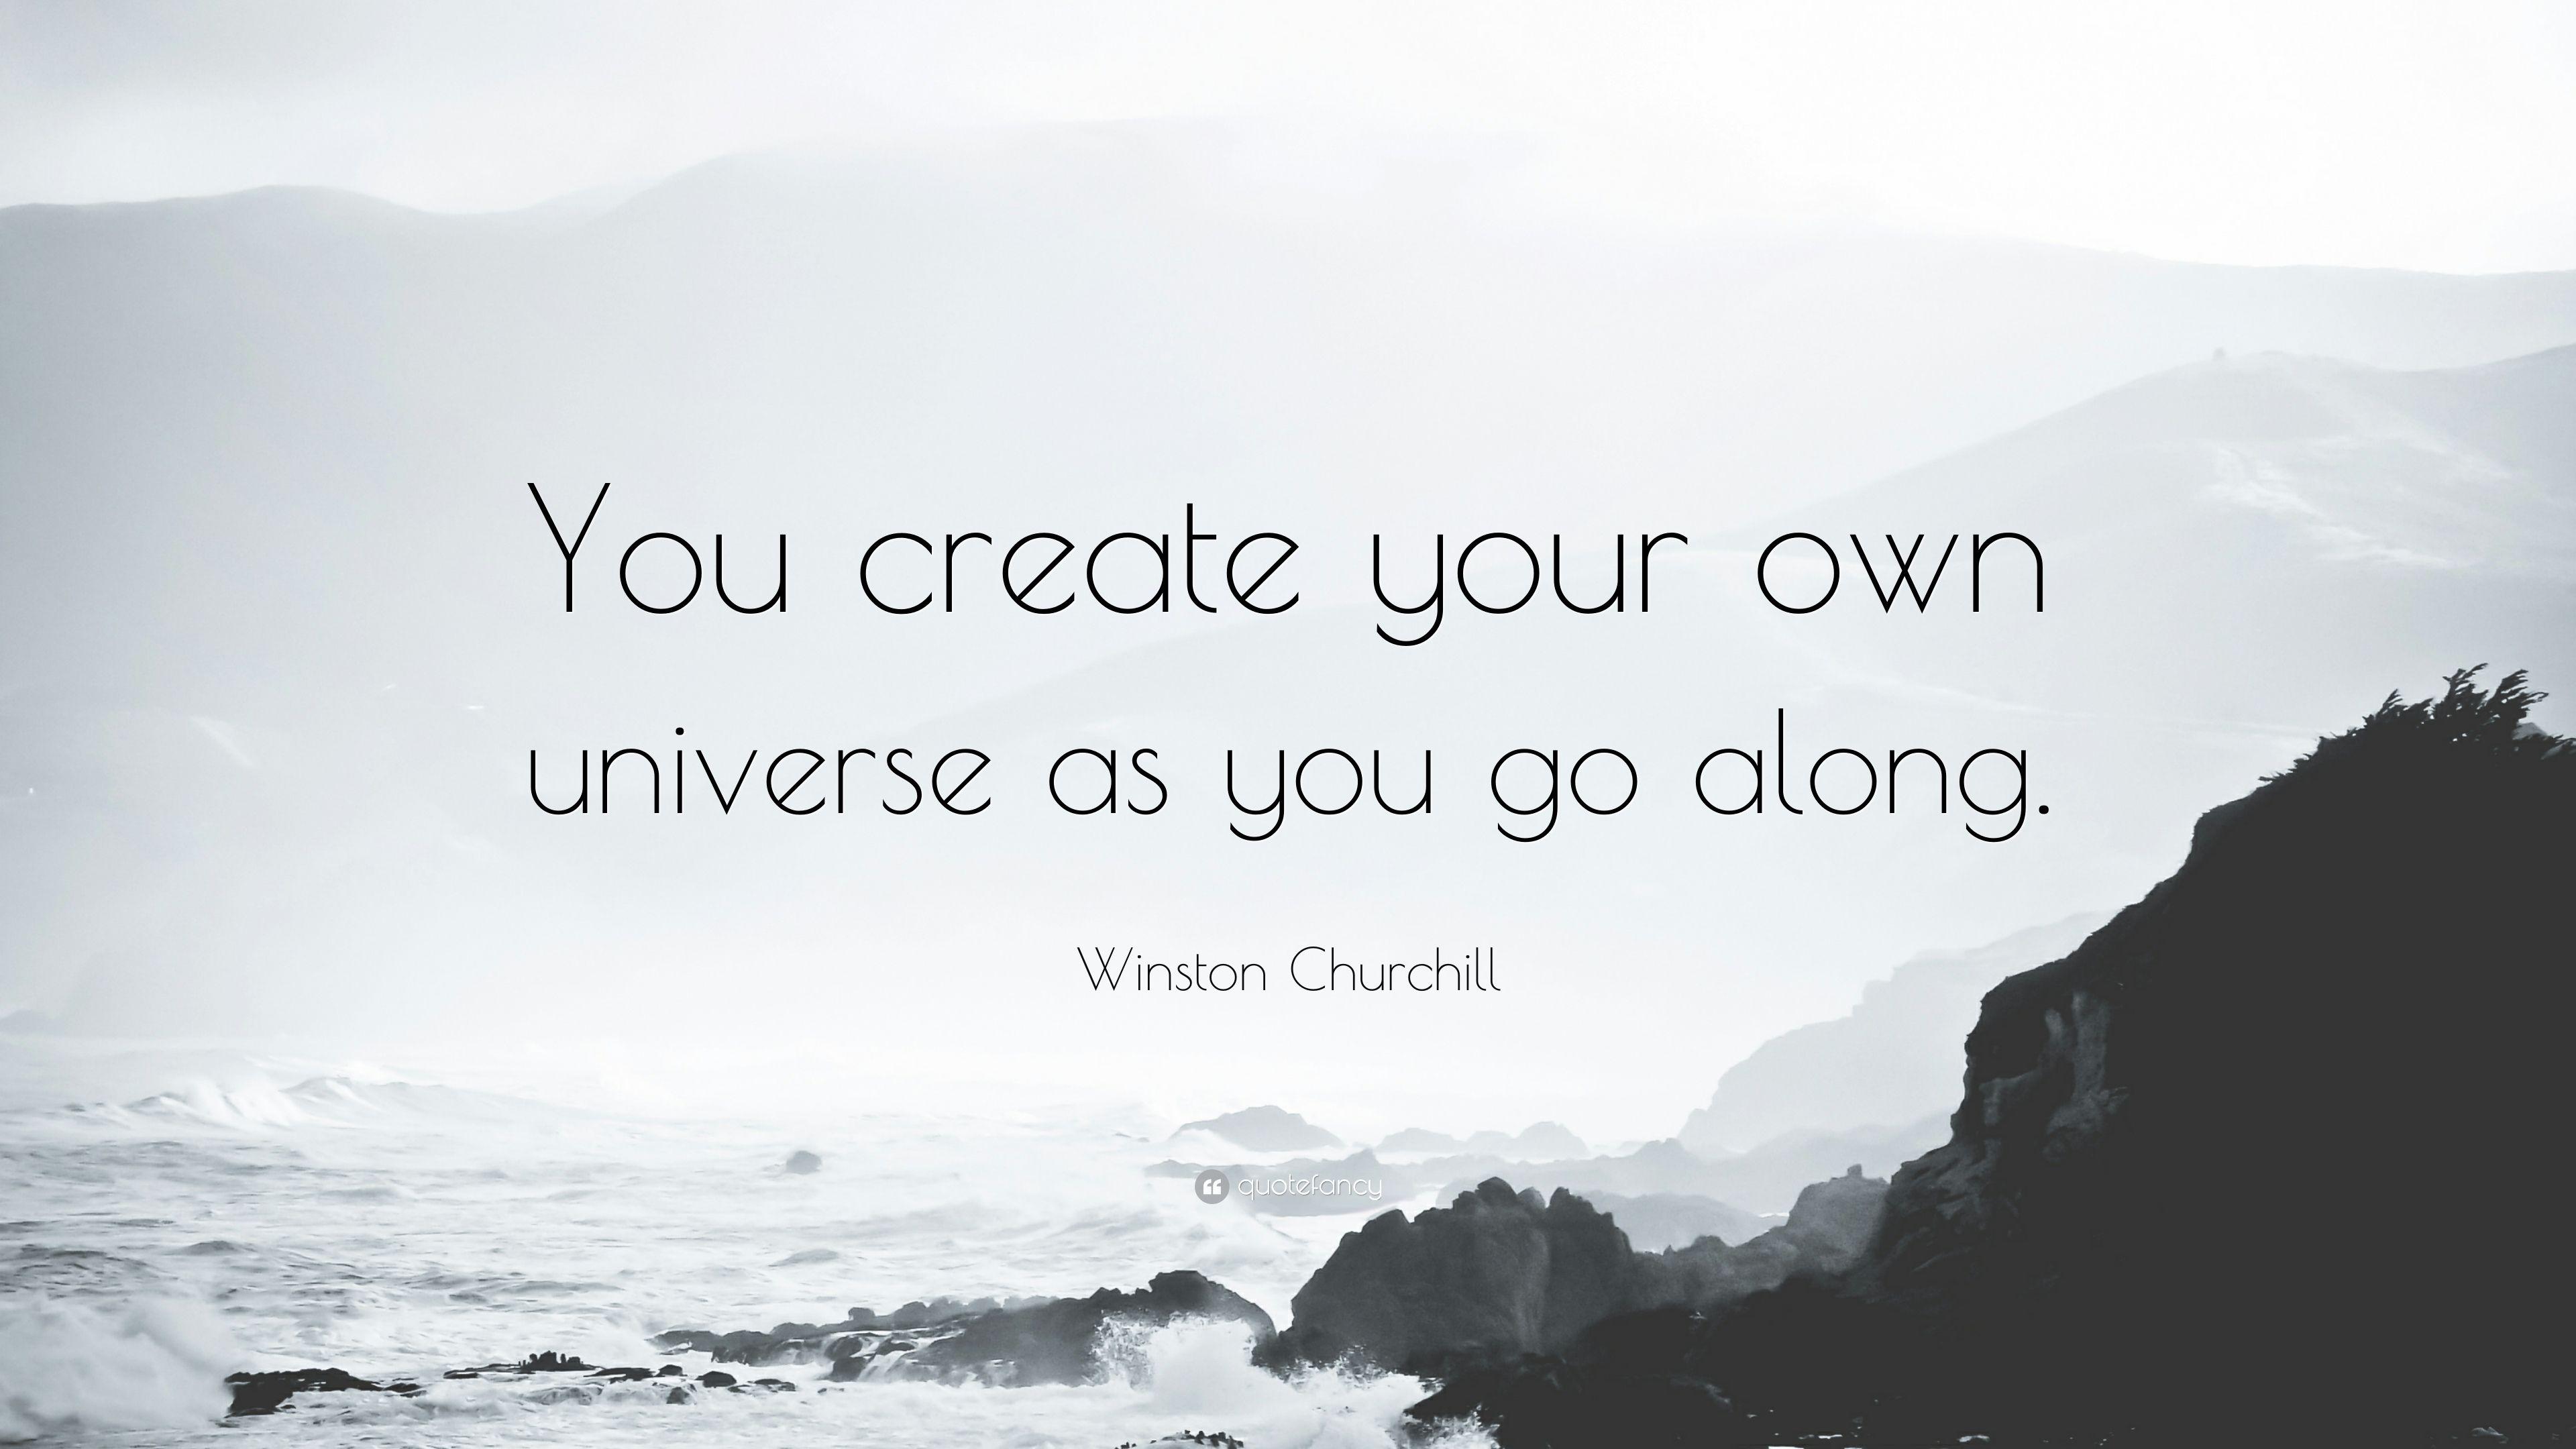 Winston Churchill Quote: “You create your own universe as you go